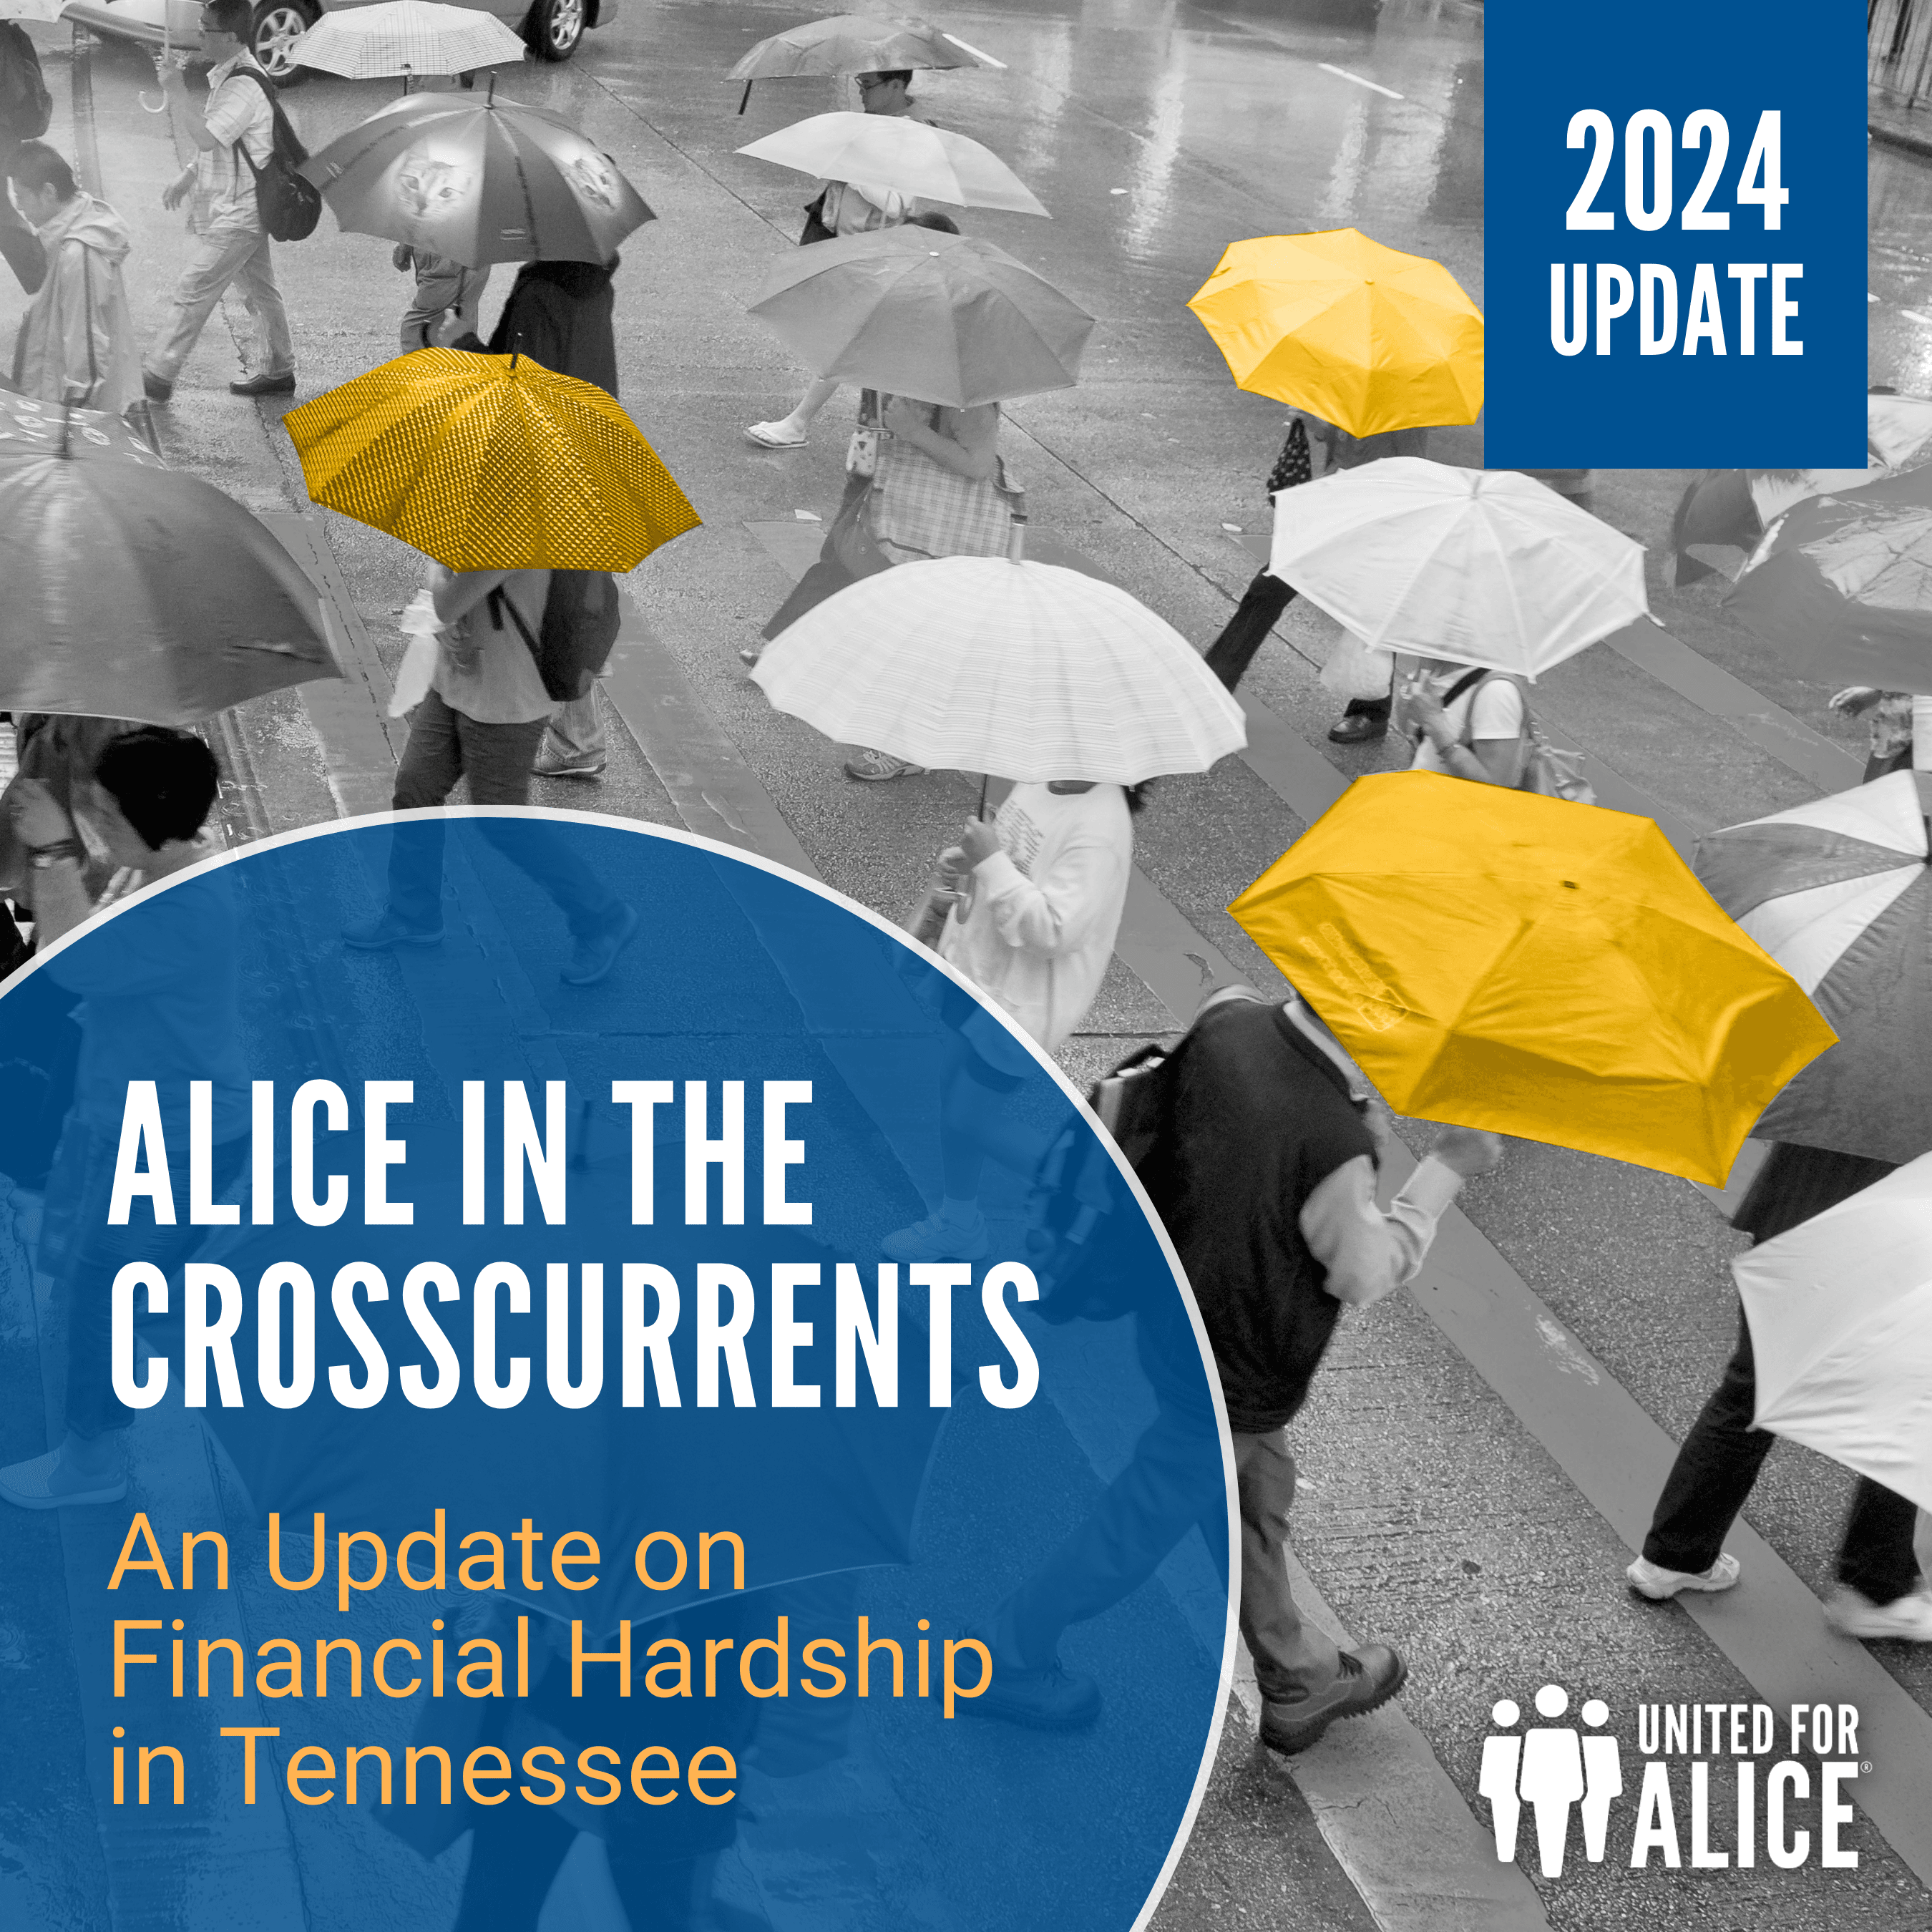 ALICE in the Crosscurrents: An Update on Financial Hardship in Tennessee